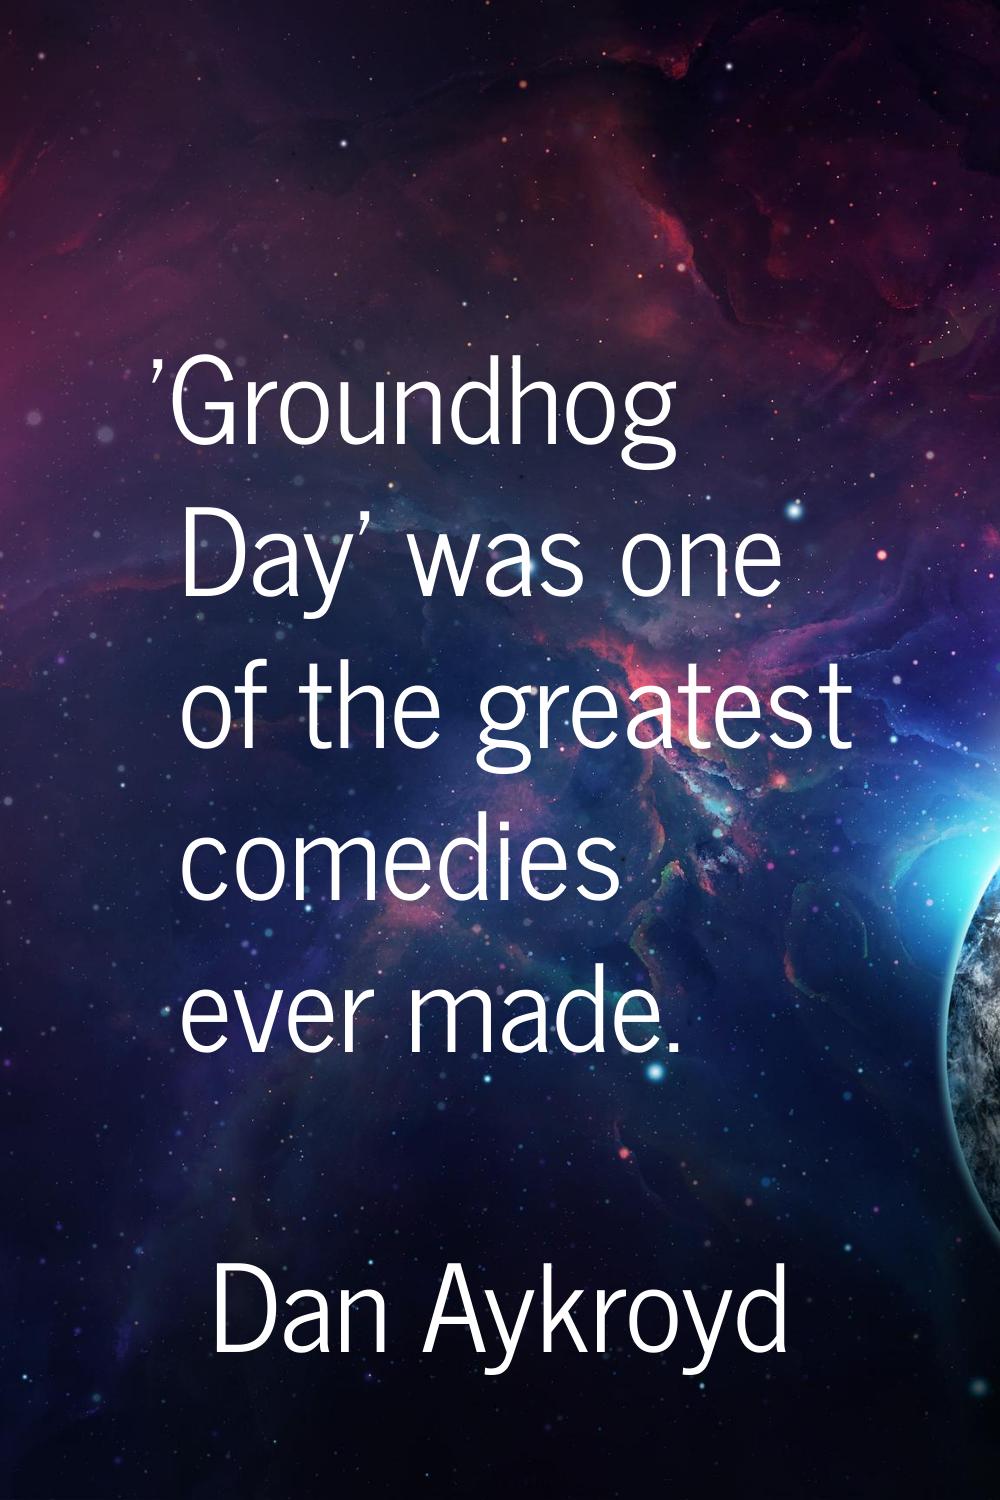 'Groundhog Day' was one of the greatest comedies ever made.